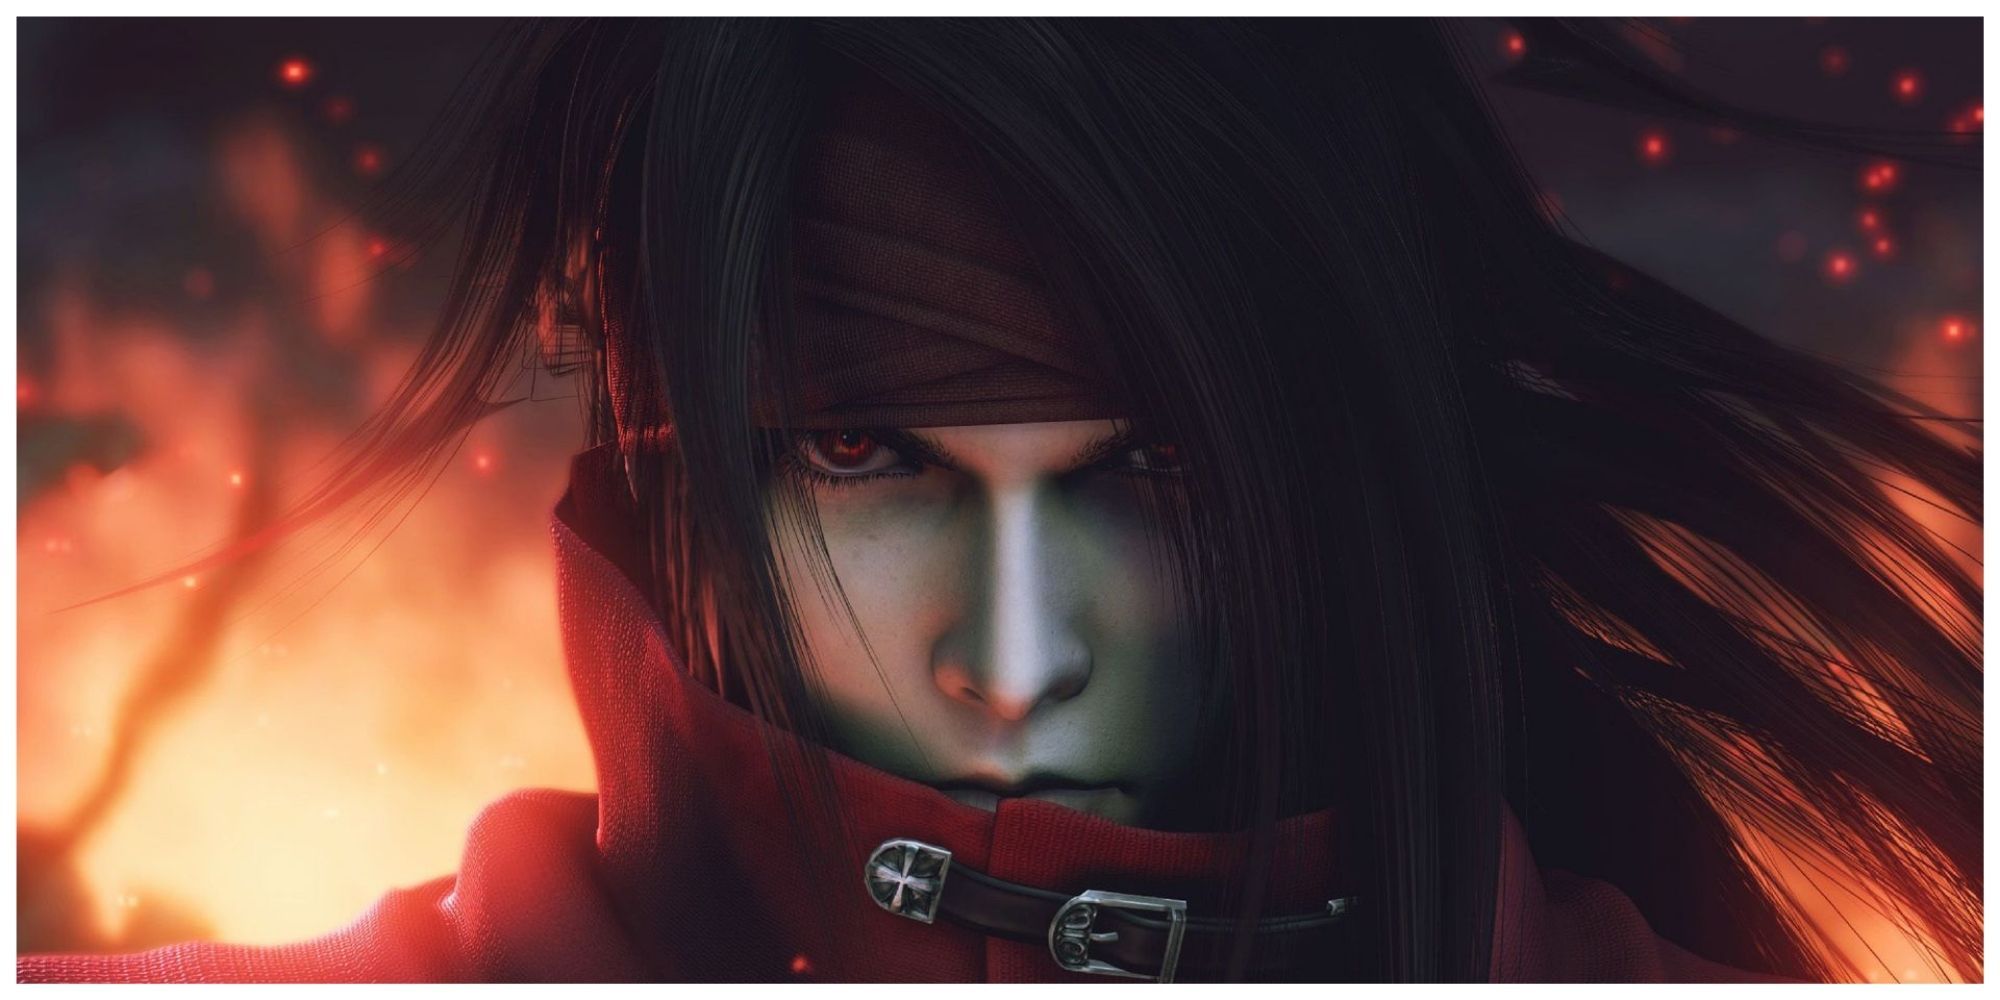 Vincent Valentine Final Fantasy VII with fire behind him looking mad